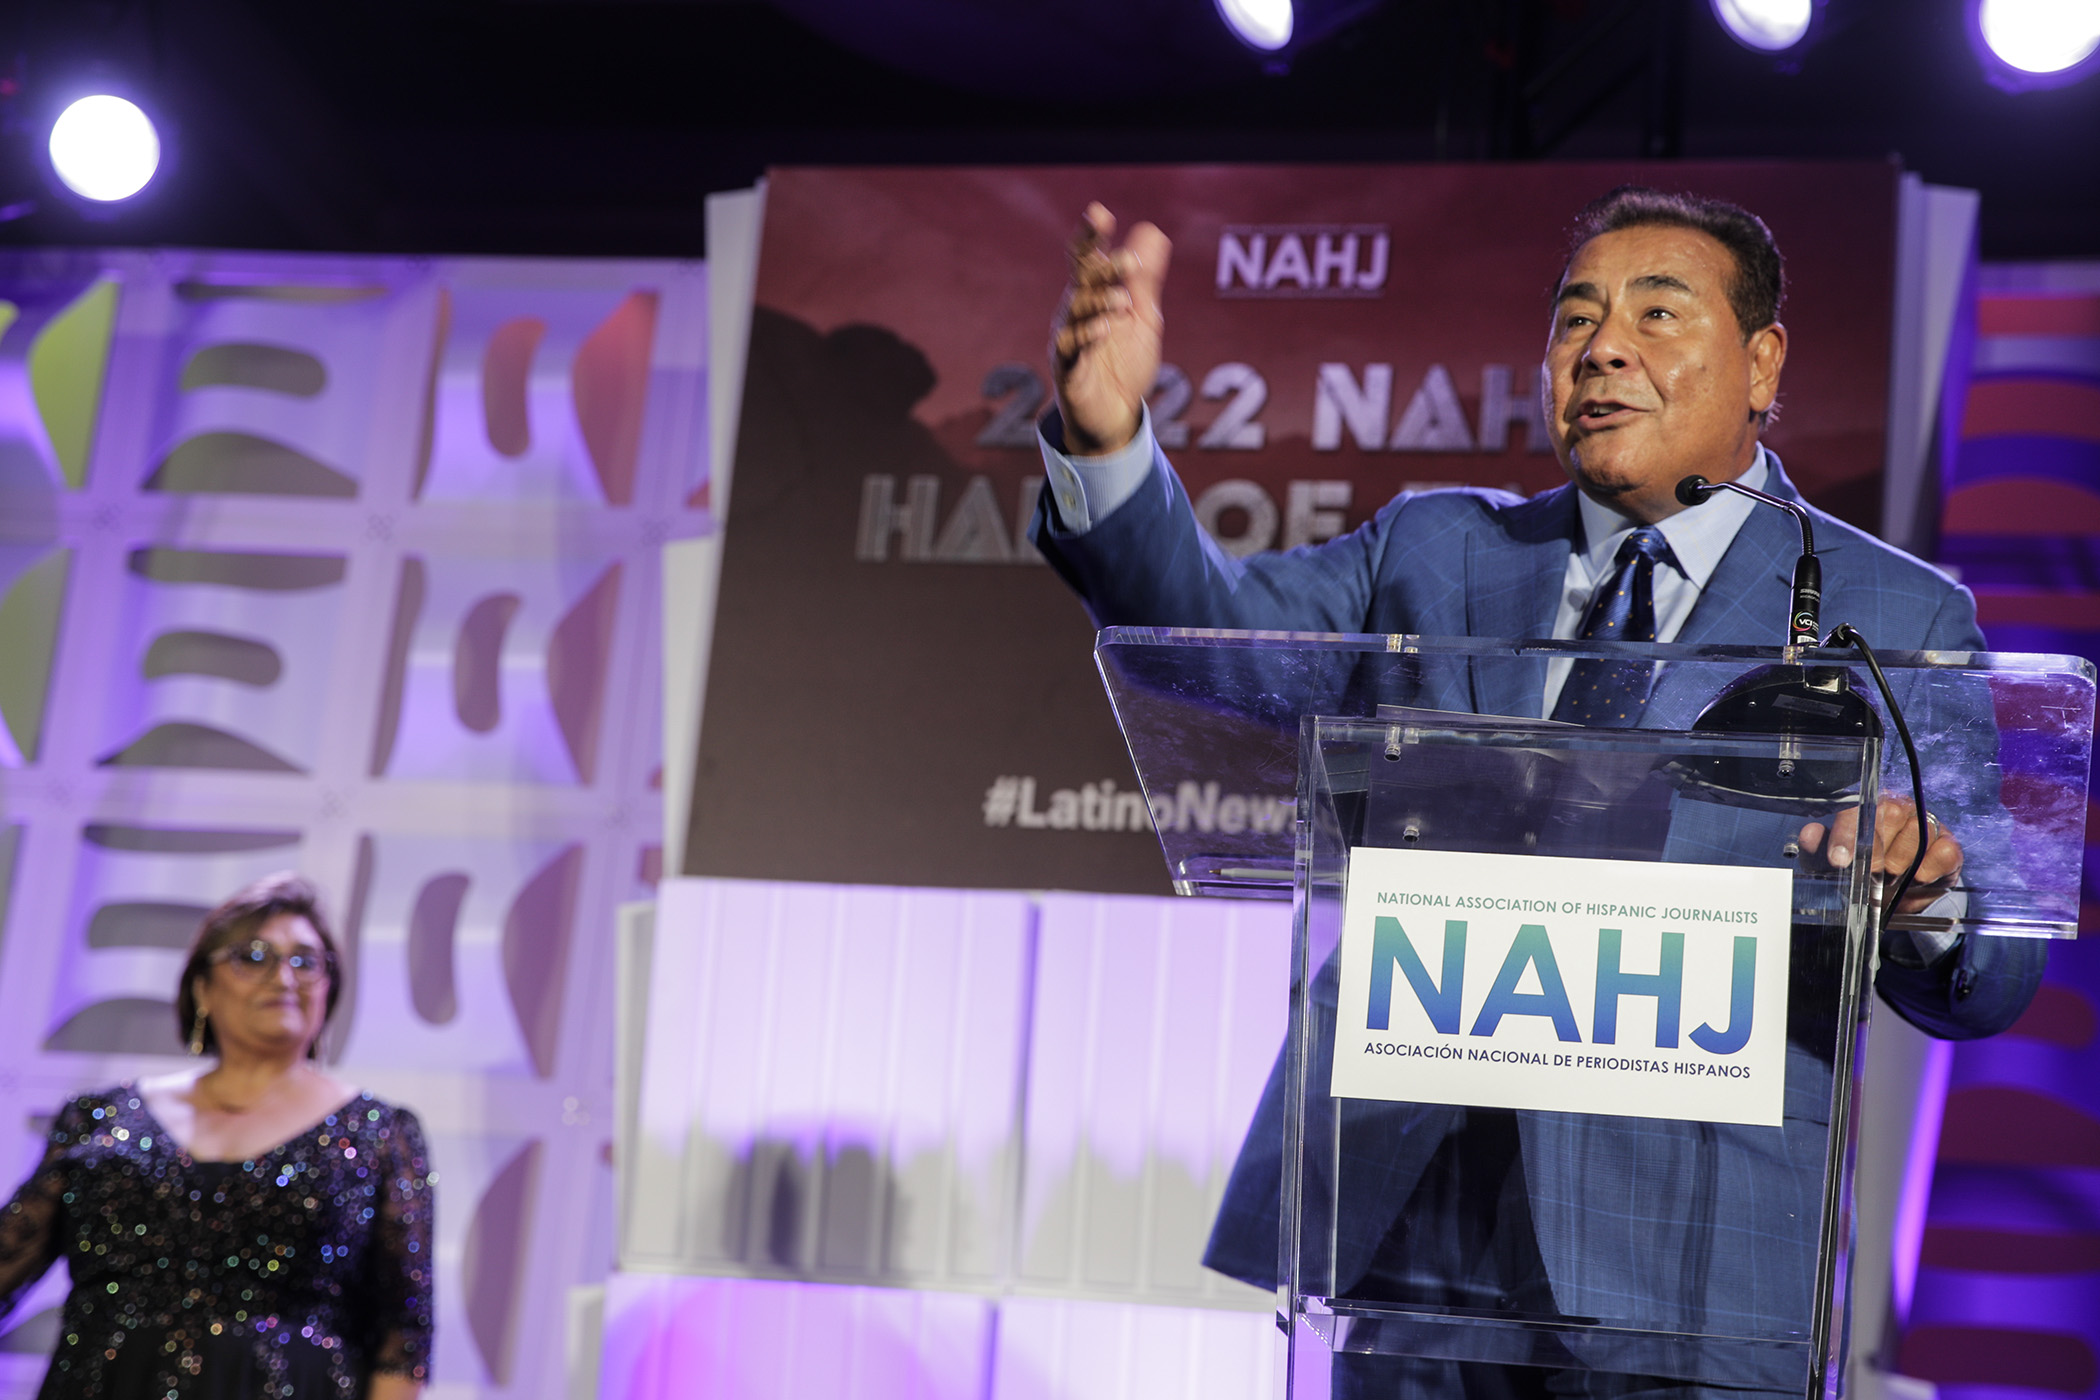 John Quiñones to the audience after receiving his National Association of Hispanic Journalists President's Award at the Hall of Fame Gala in Las Vegas, Nev., on Saturday, August 6, 2022.